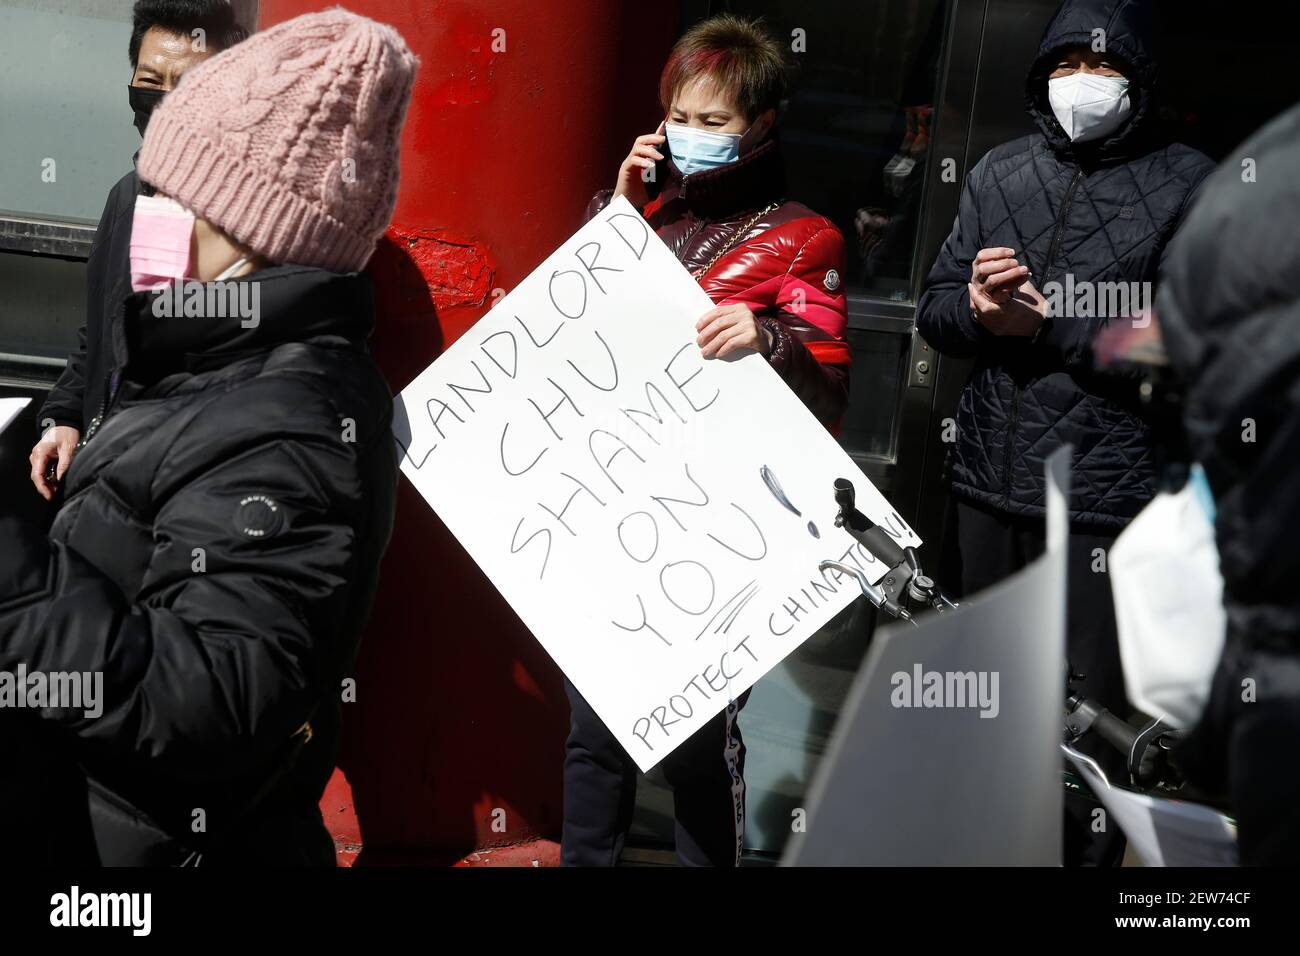 A demonstrator from 318 restaurant workers union holds up a placard during a demonstration against the closure of Jing Fong restaurant in Chinatown. Recent extraordinary rental demands placed by Jonathan Chu, the biggest landlord in Chinatown, on small business has forced many to shutter their doors. Such demands have forced Jing Fong restaurant to end operations by March 7, 2021. Stock Photo